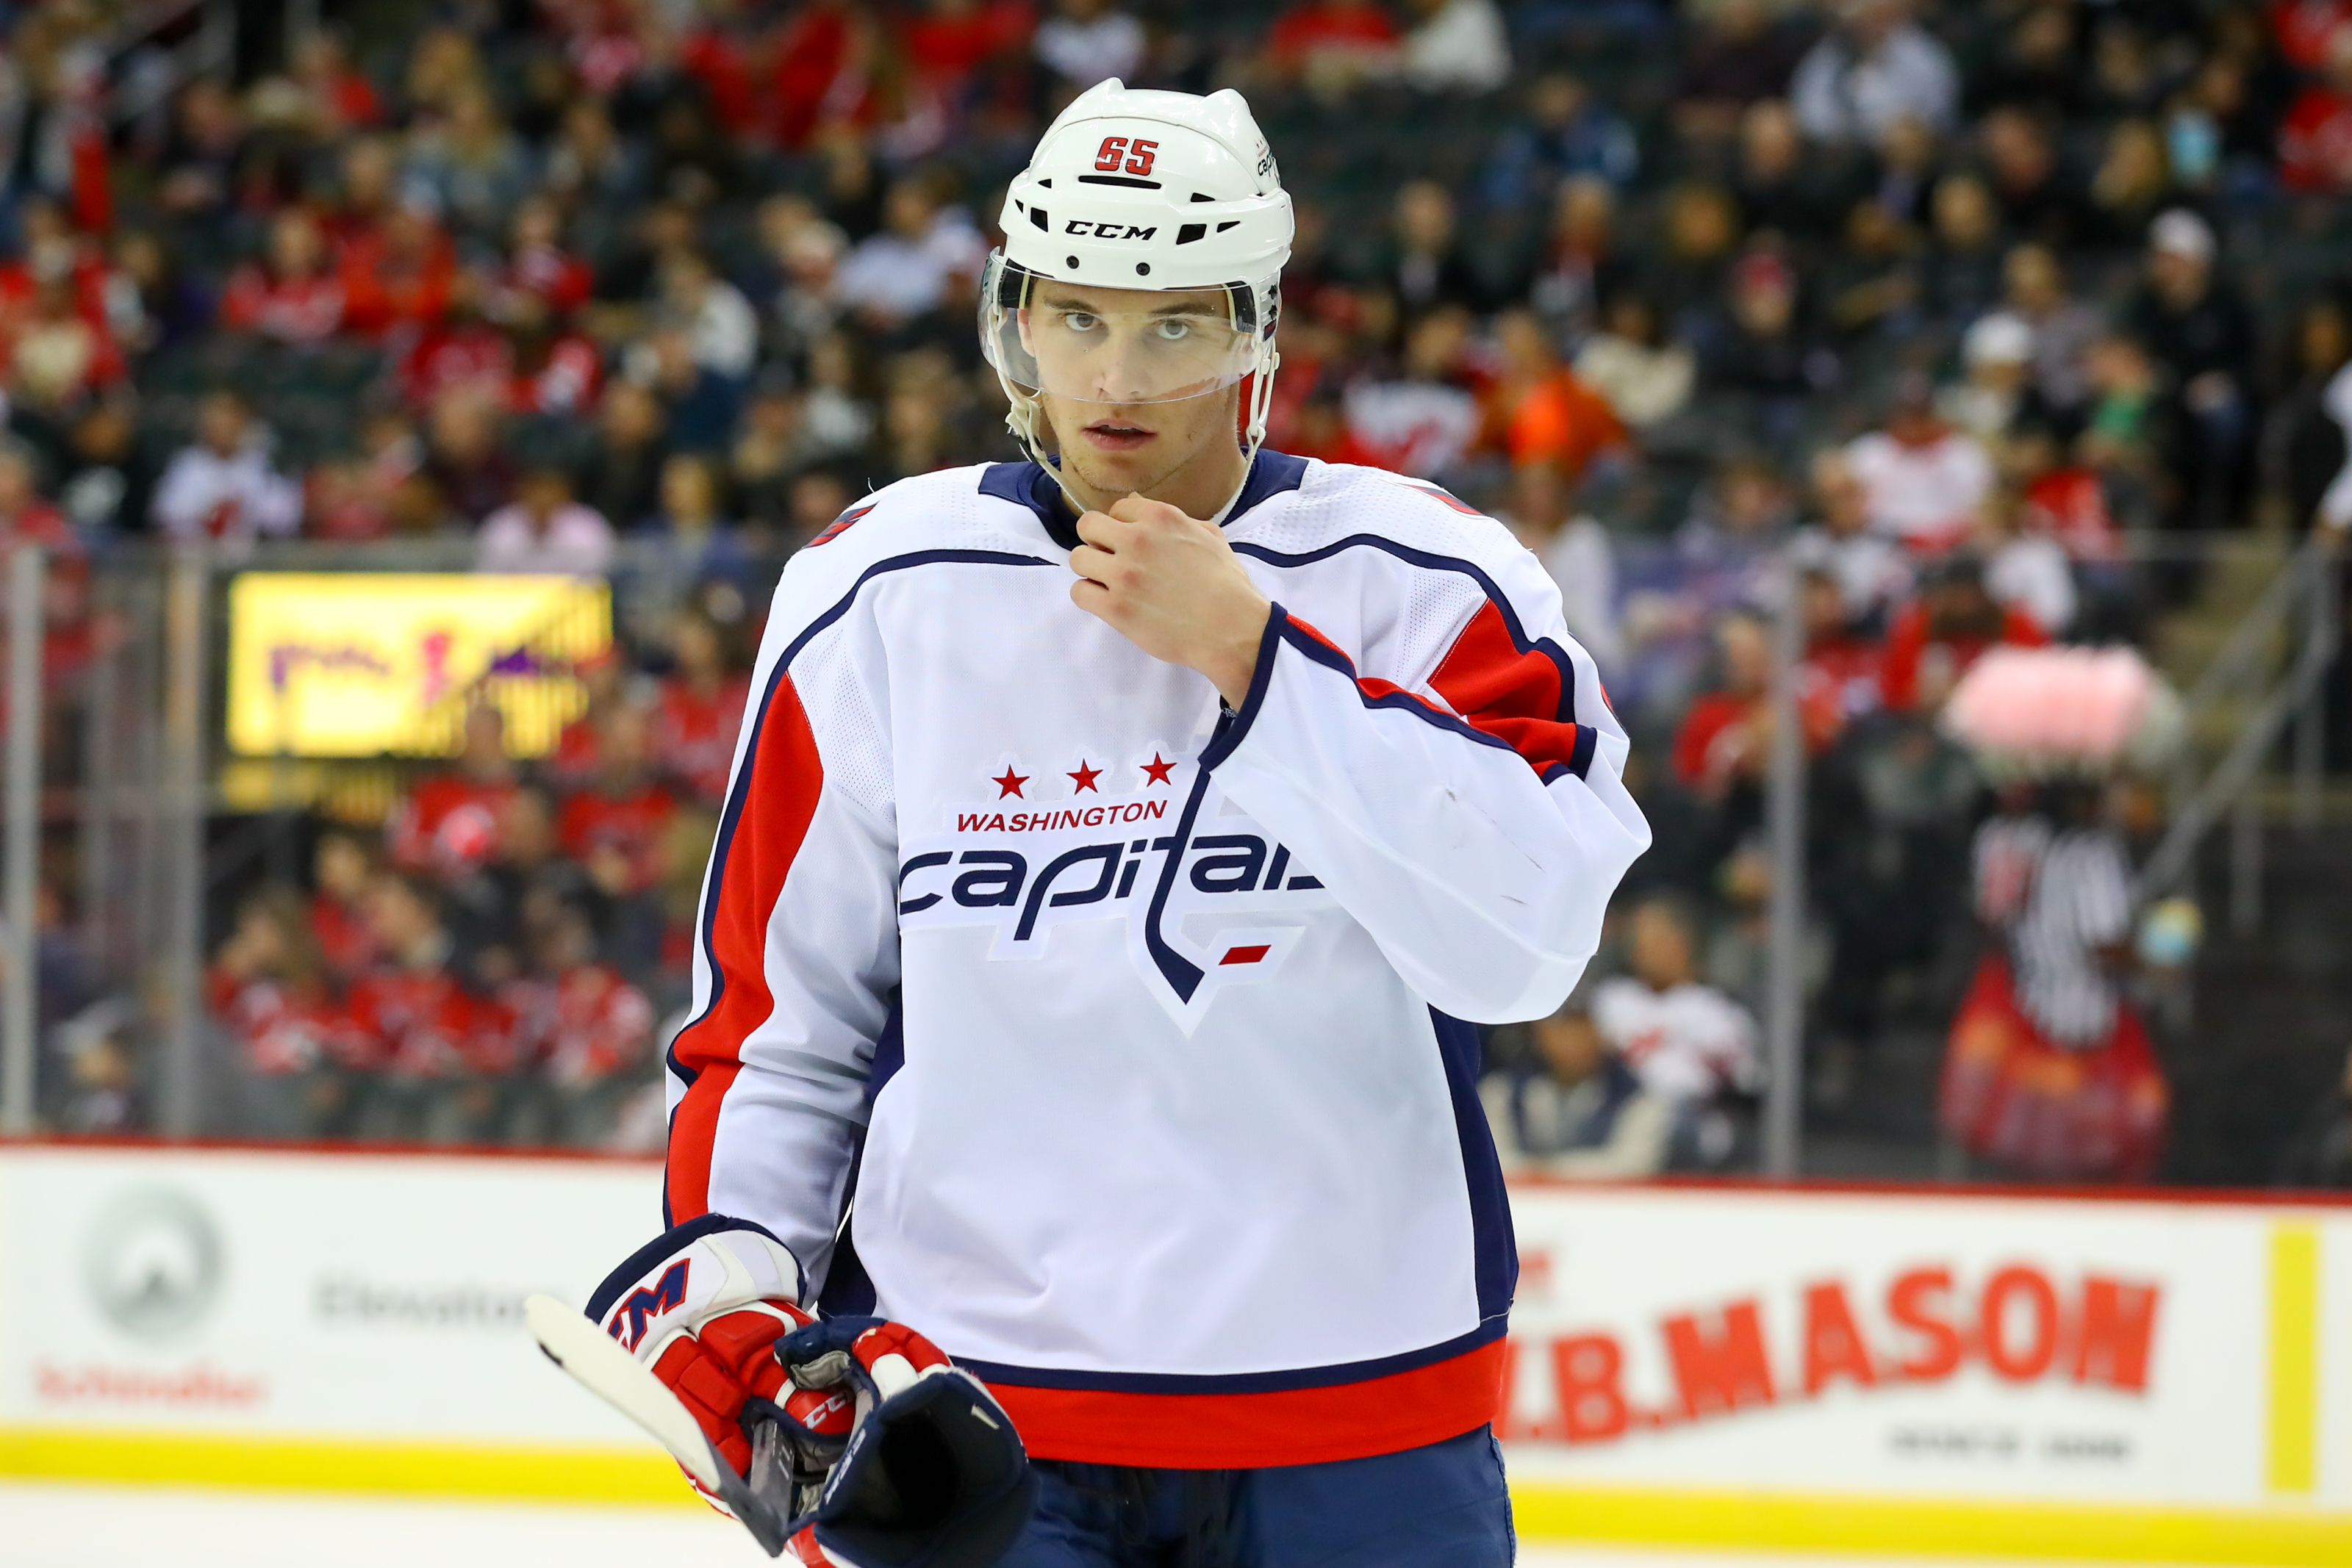 Avalanche signs forward Andre Burakovsky to one-year deal